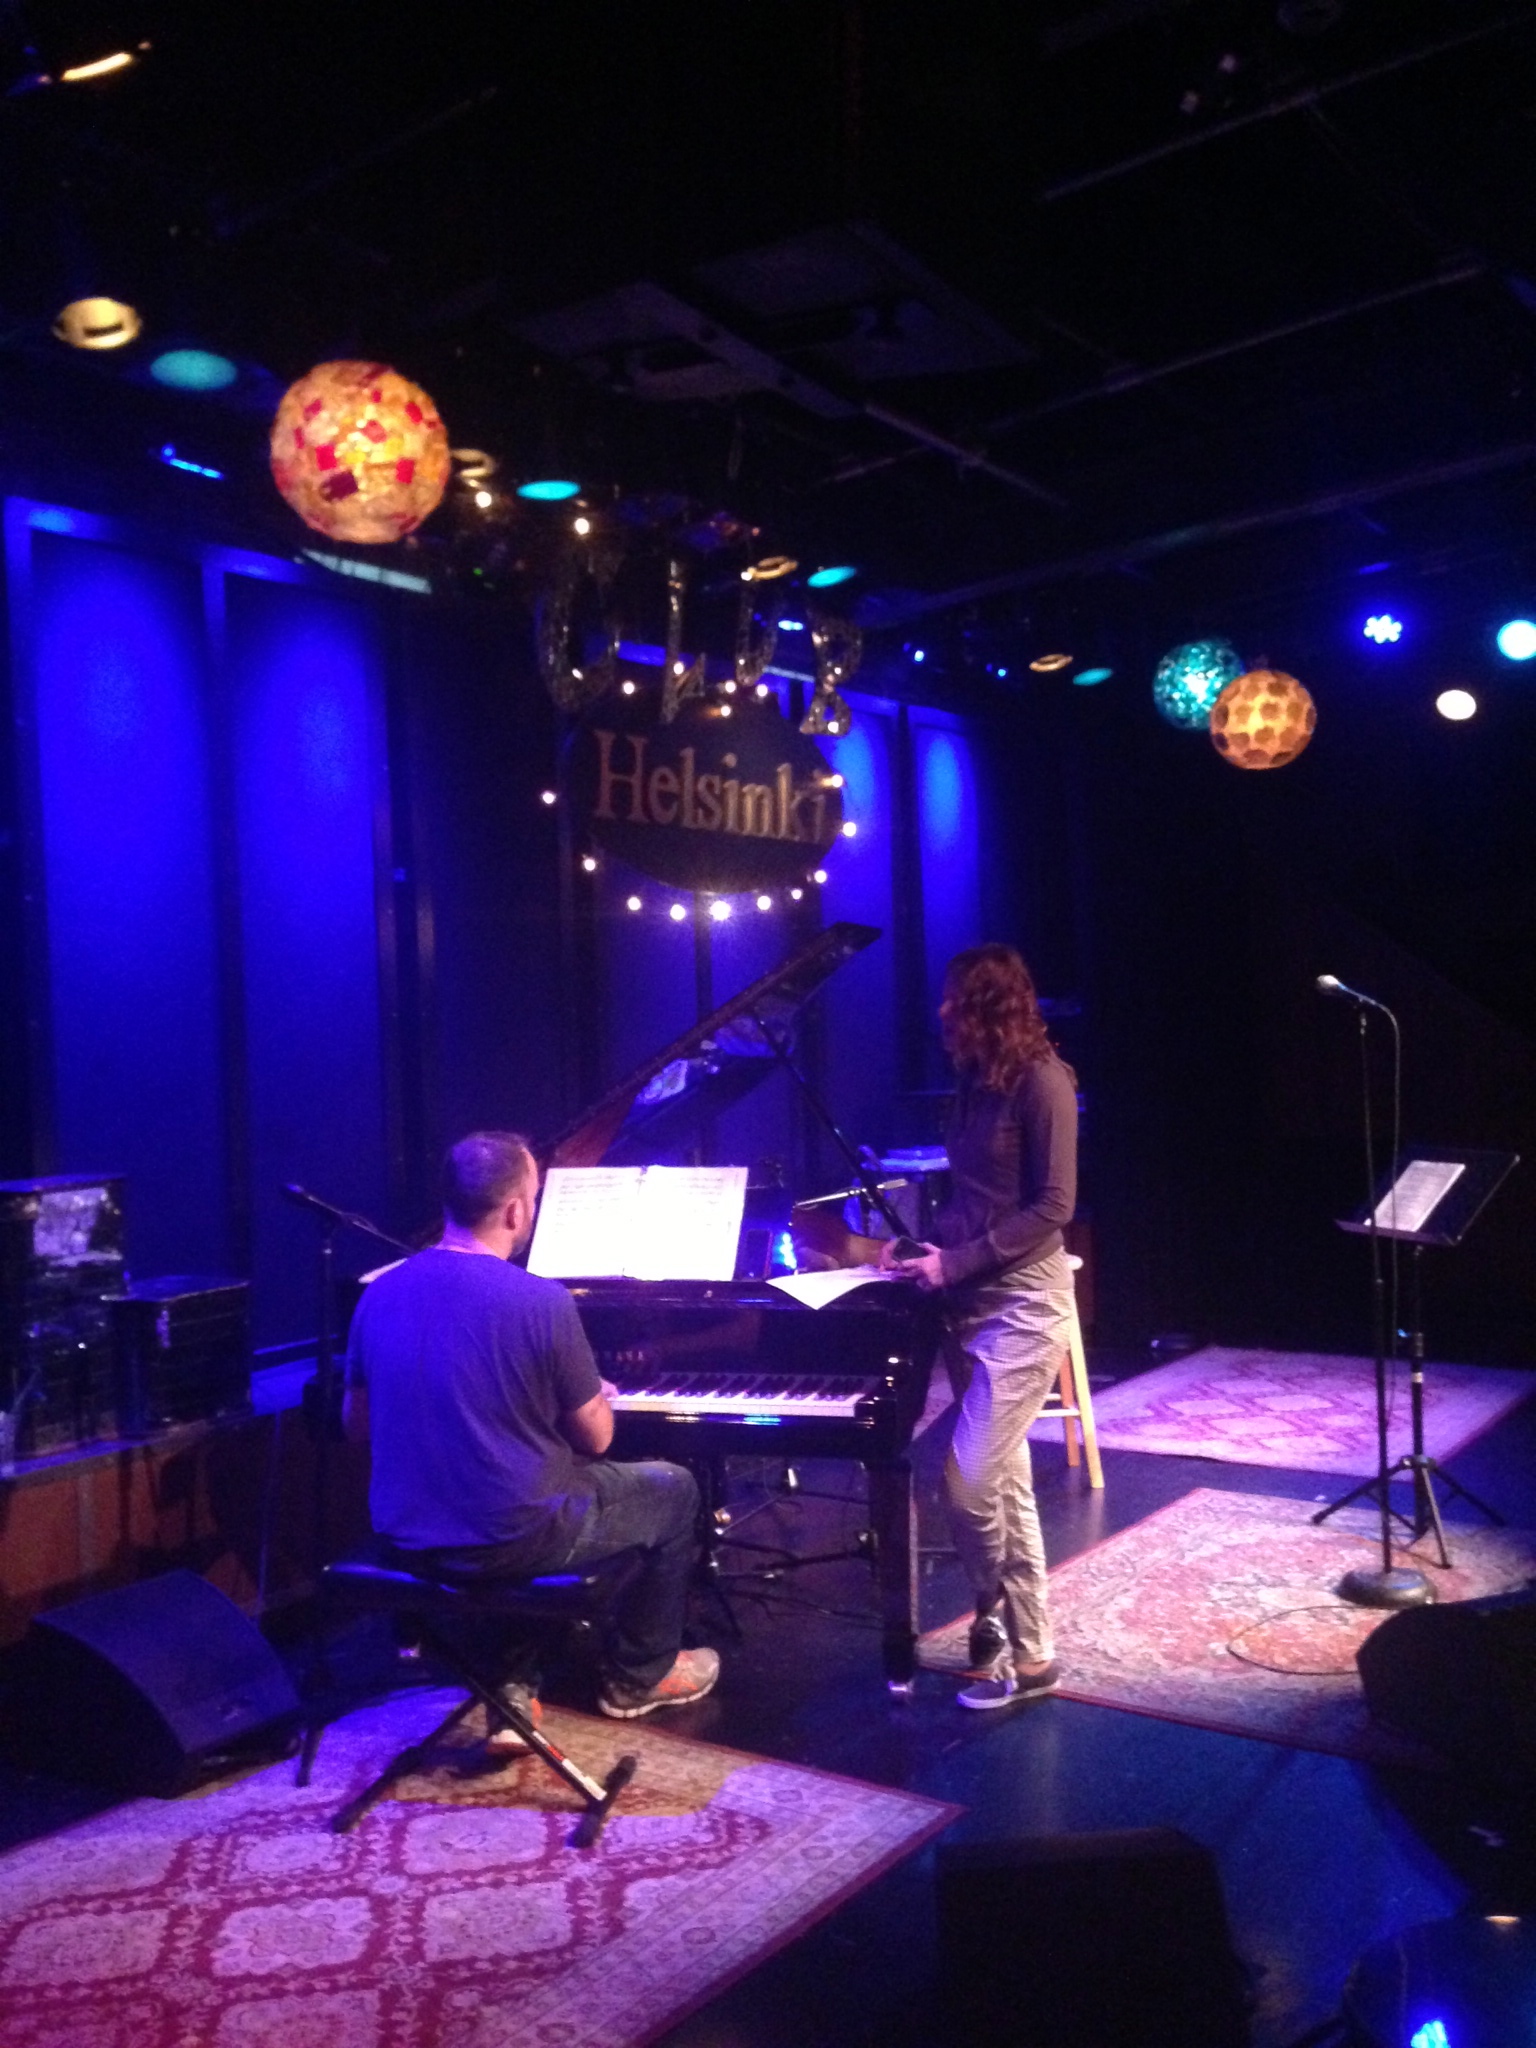 pre-show soundcheck and rehearsal with Sandra at Helsinki Hudson. Aug 30, 2013